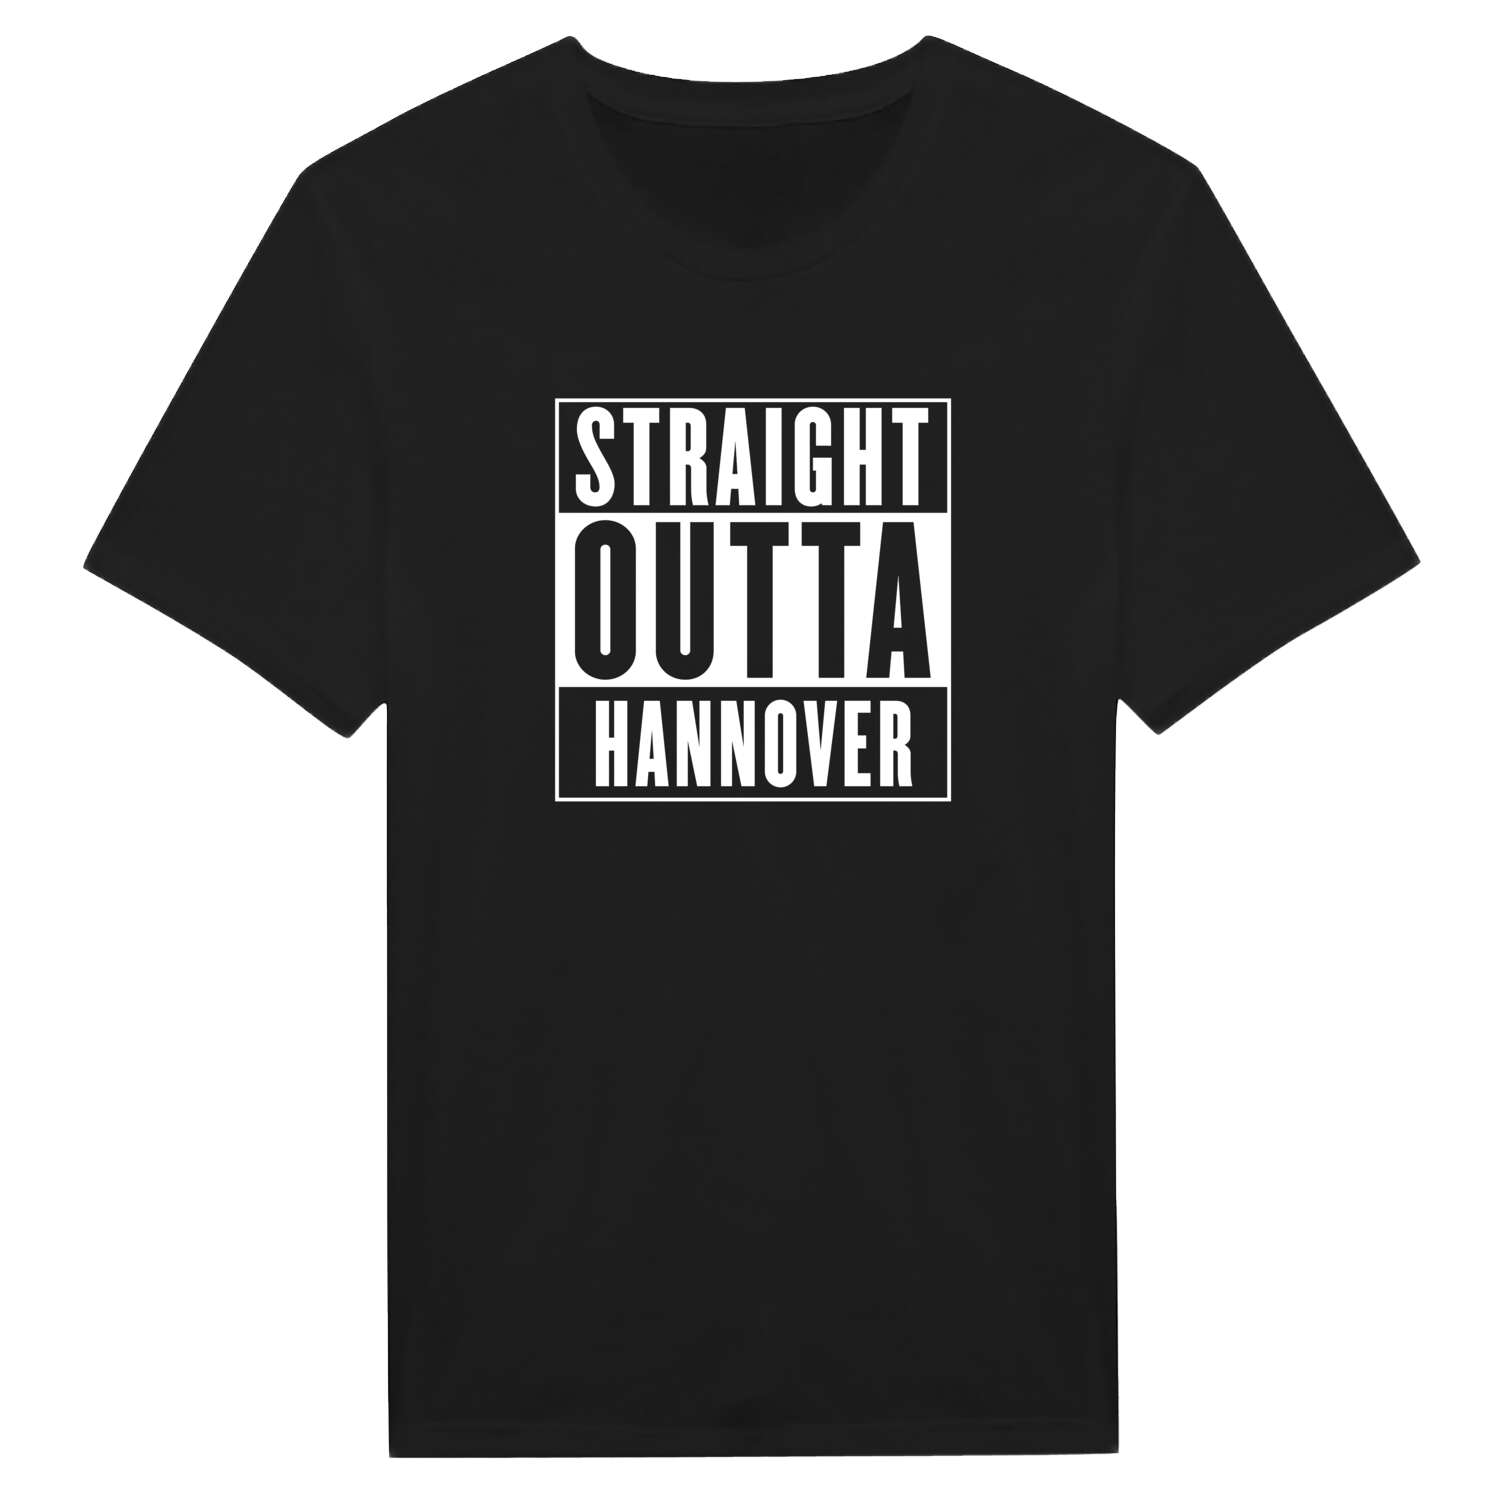 Hannover T-Shirt »Straight Outta«